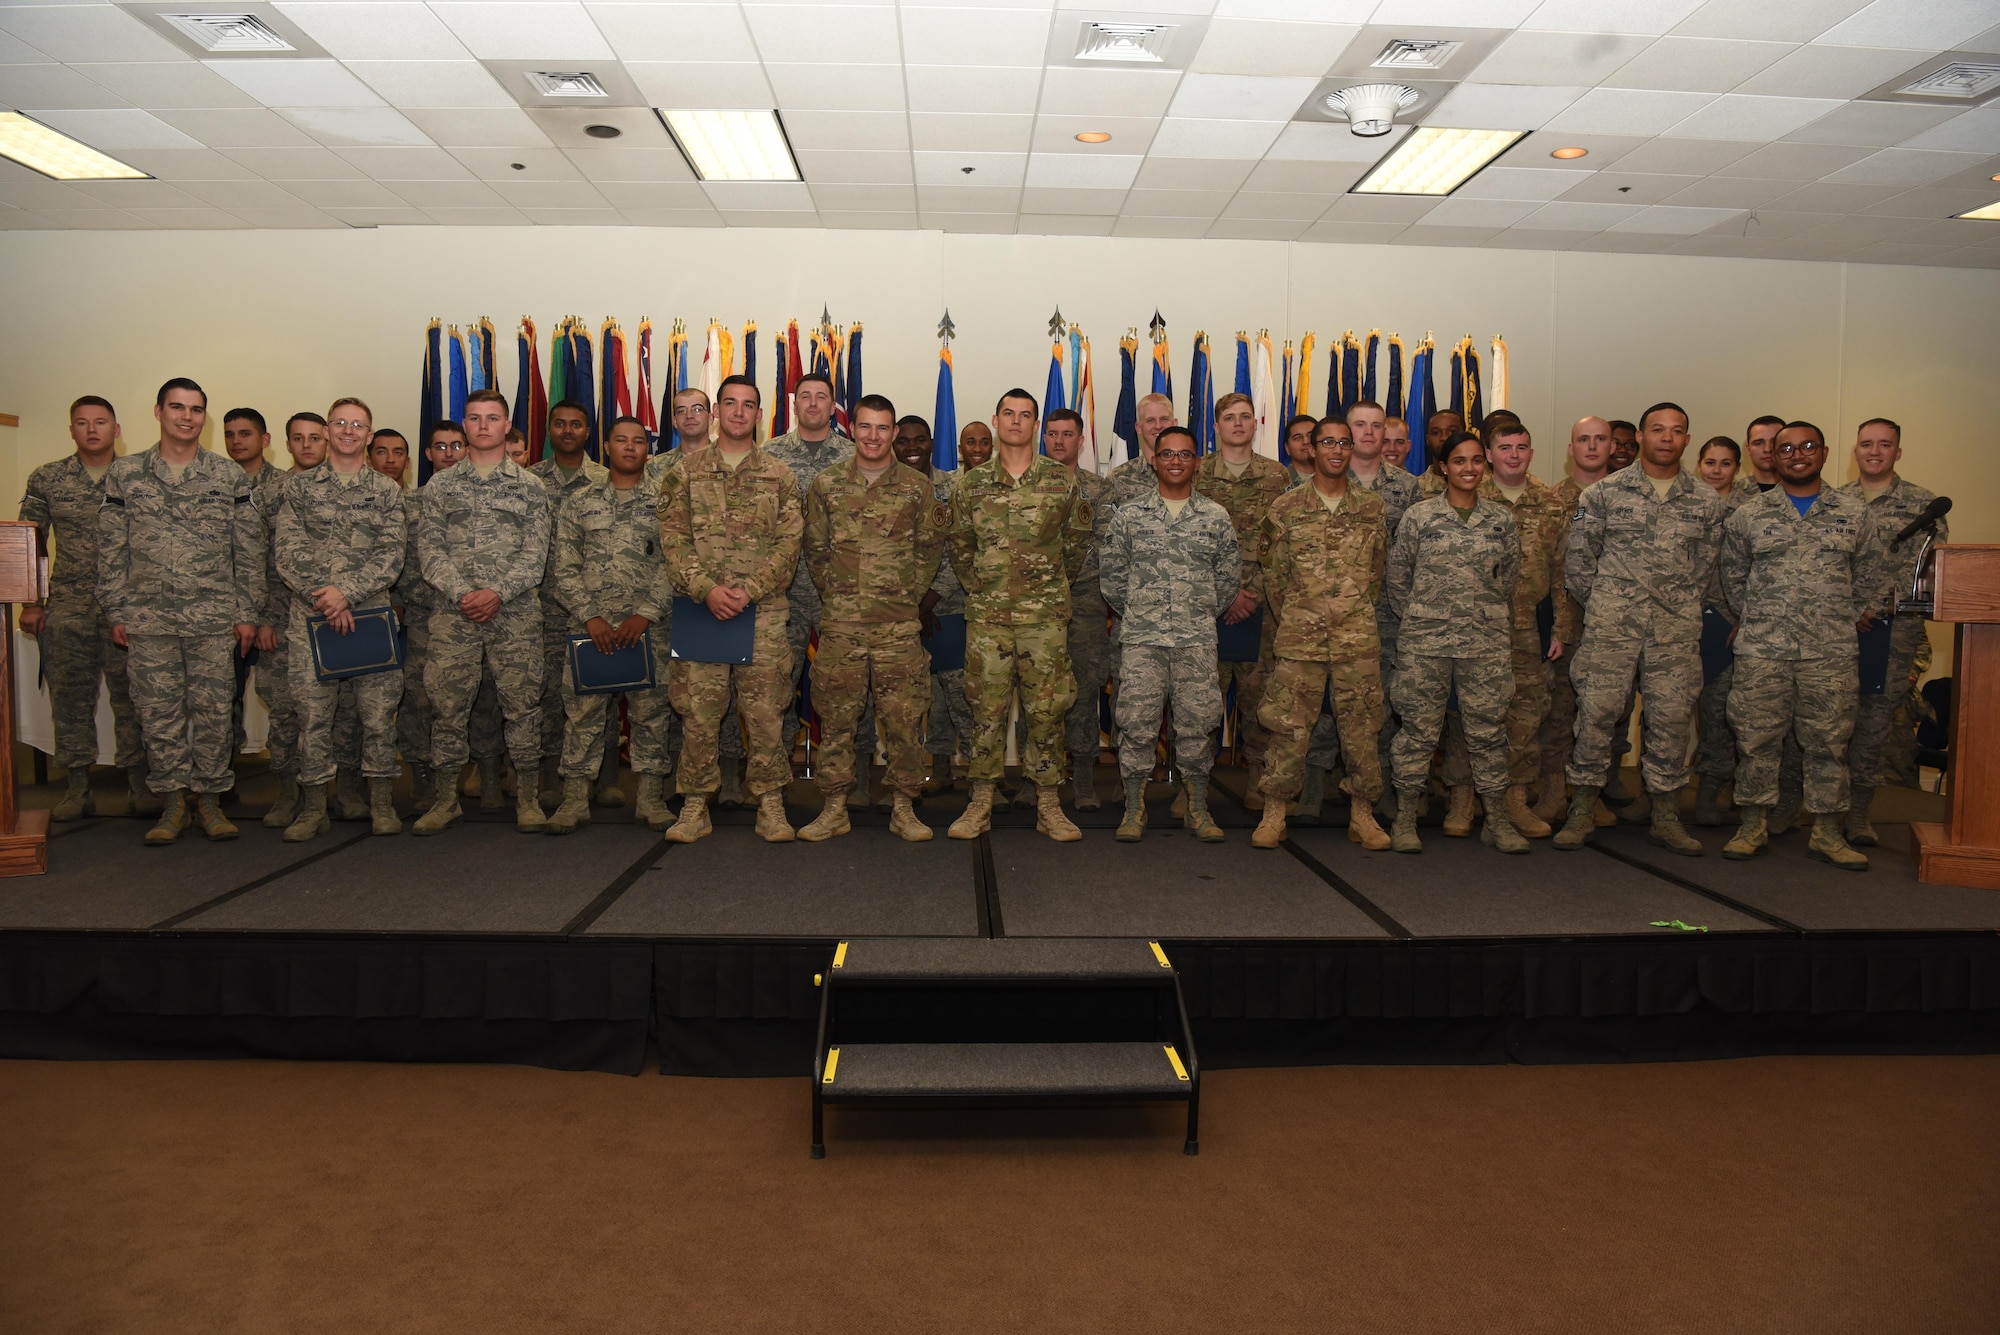 Enlisted Airmen who promoted in September, pose for a photo, Sept. 30, 2016, at F.E. Warren Air Force Base, Wyo. Each month the Mighty Ninety hosts a celebration for enlisted promotees from the base. (U.S. Air Force photo by Airman 1st Class Breanna Carter)